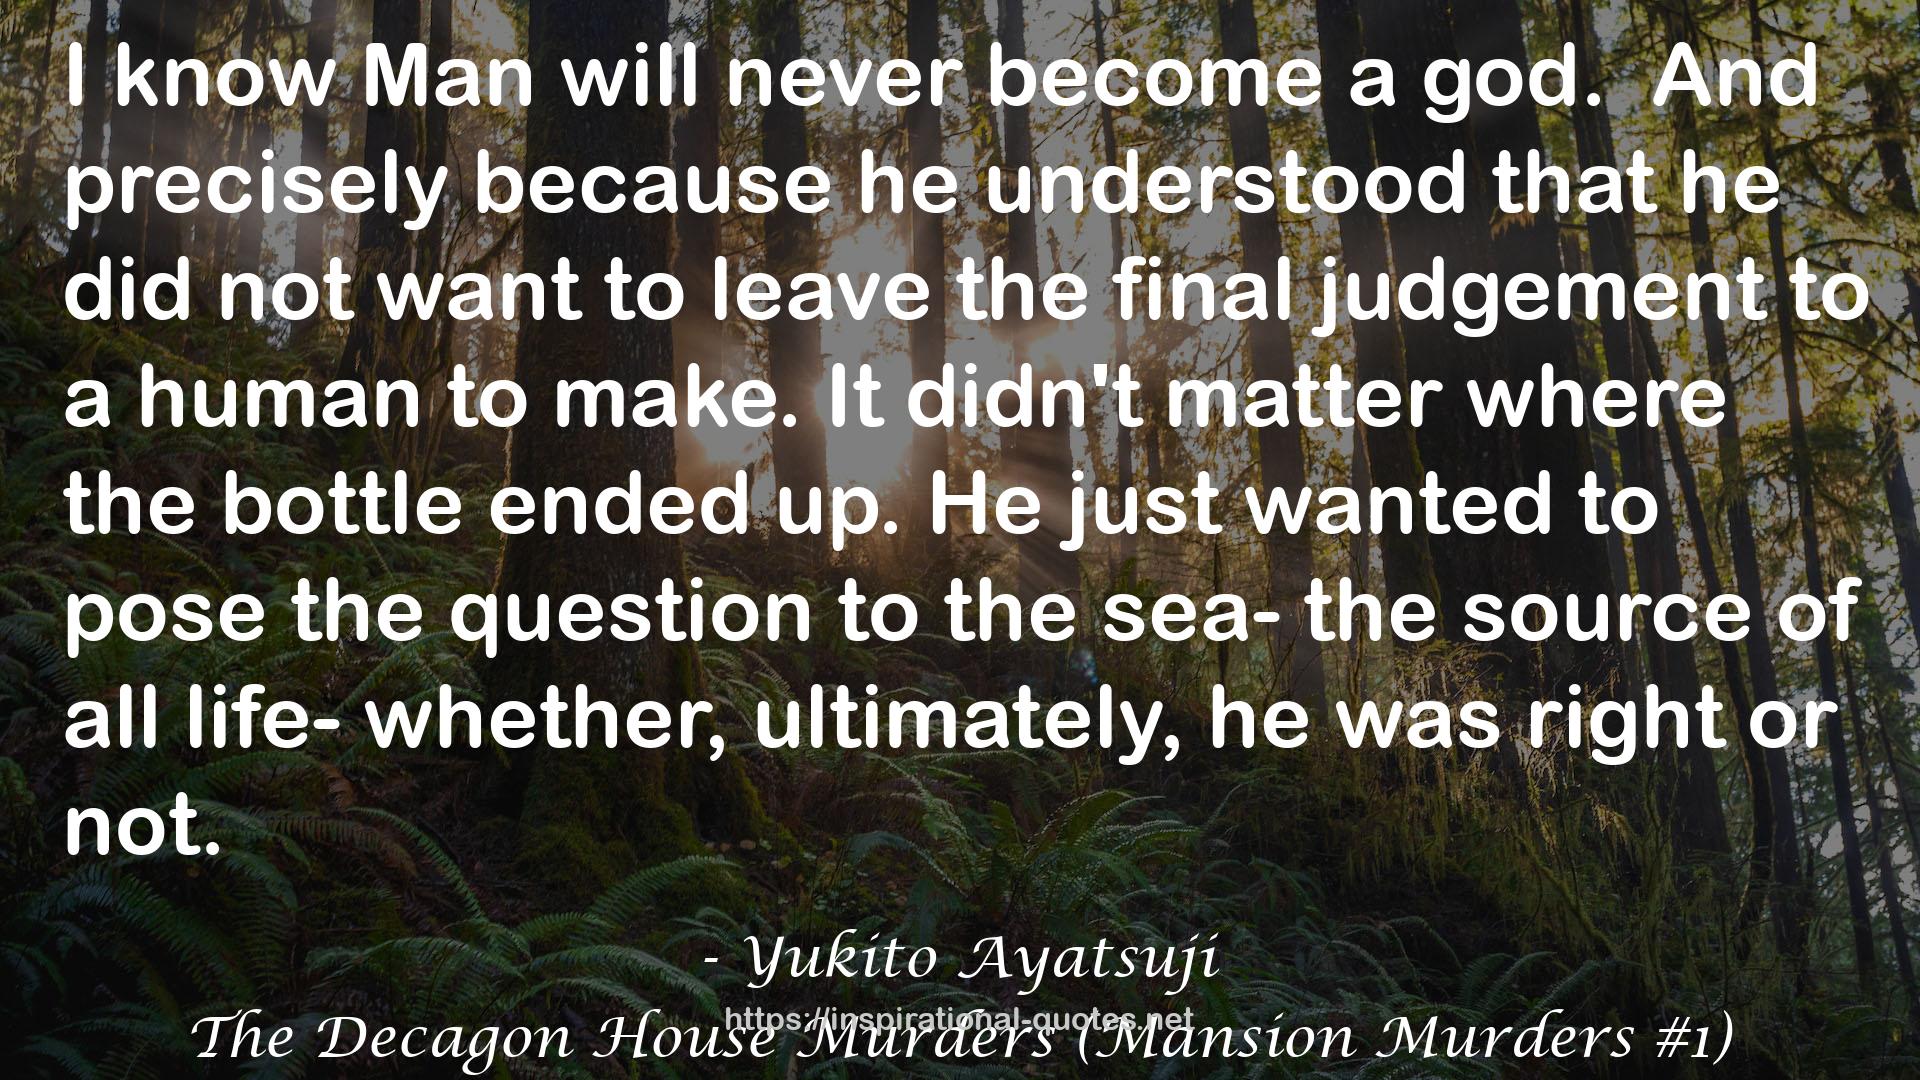 The Decagon House Murders (Mansion Murders #1) QUOTES